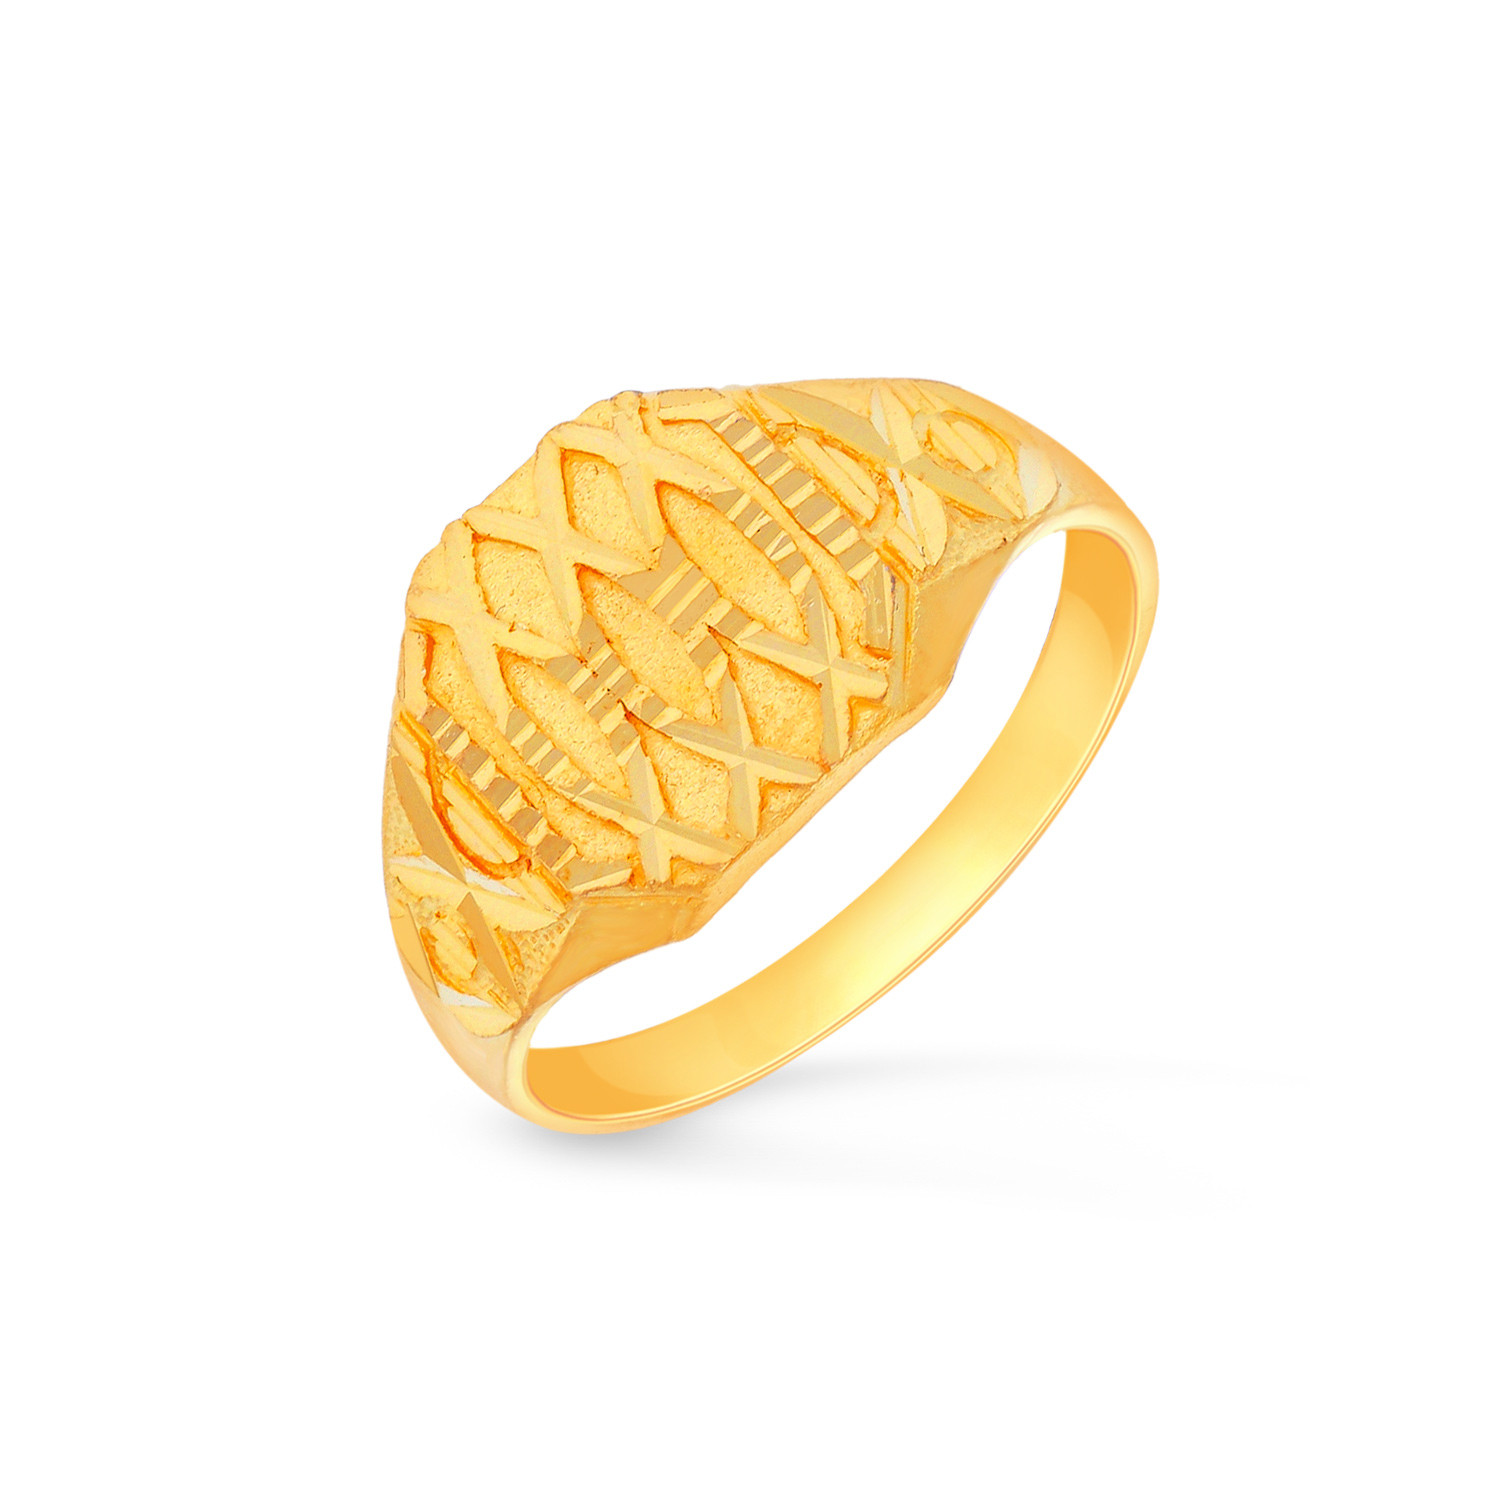 Buy Malabar Gold 22 KT Two Tone Gold Casual Ring for Men Online